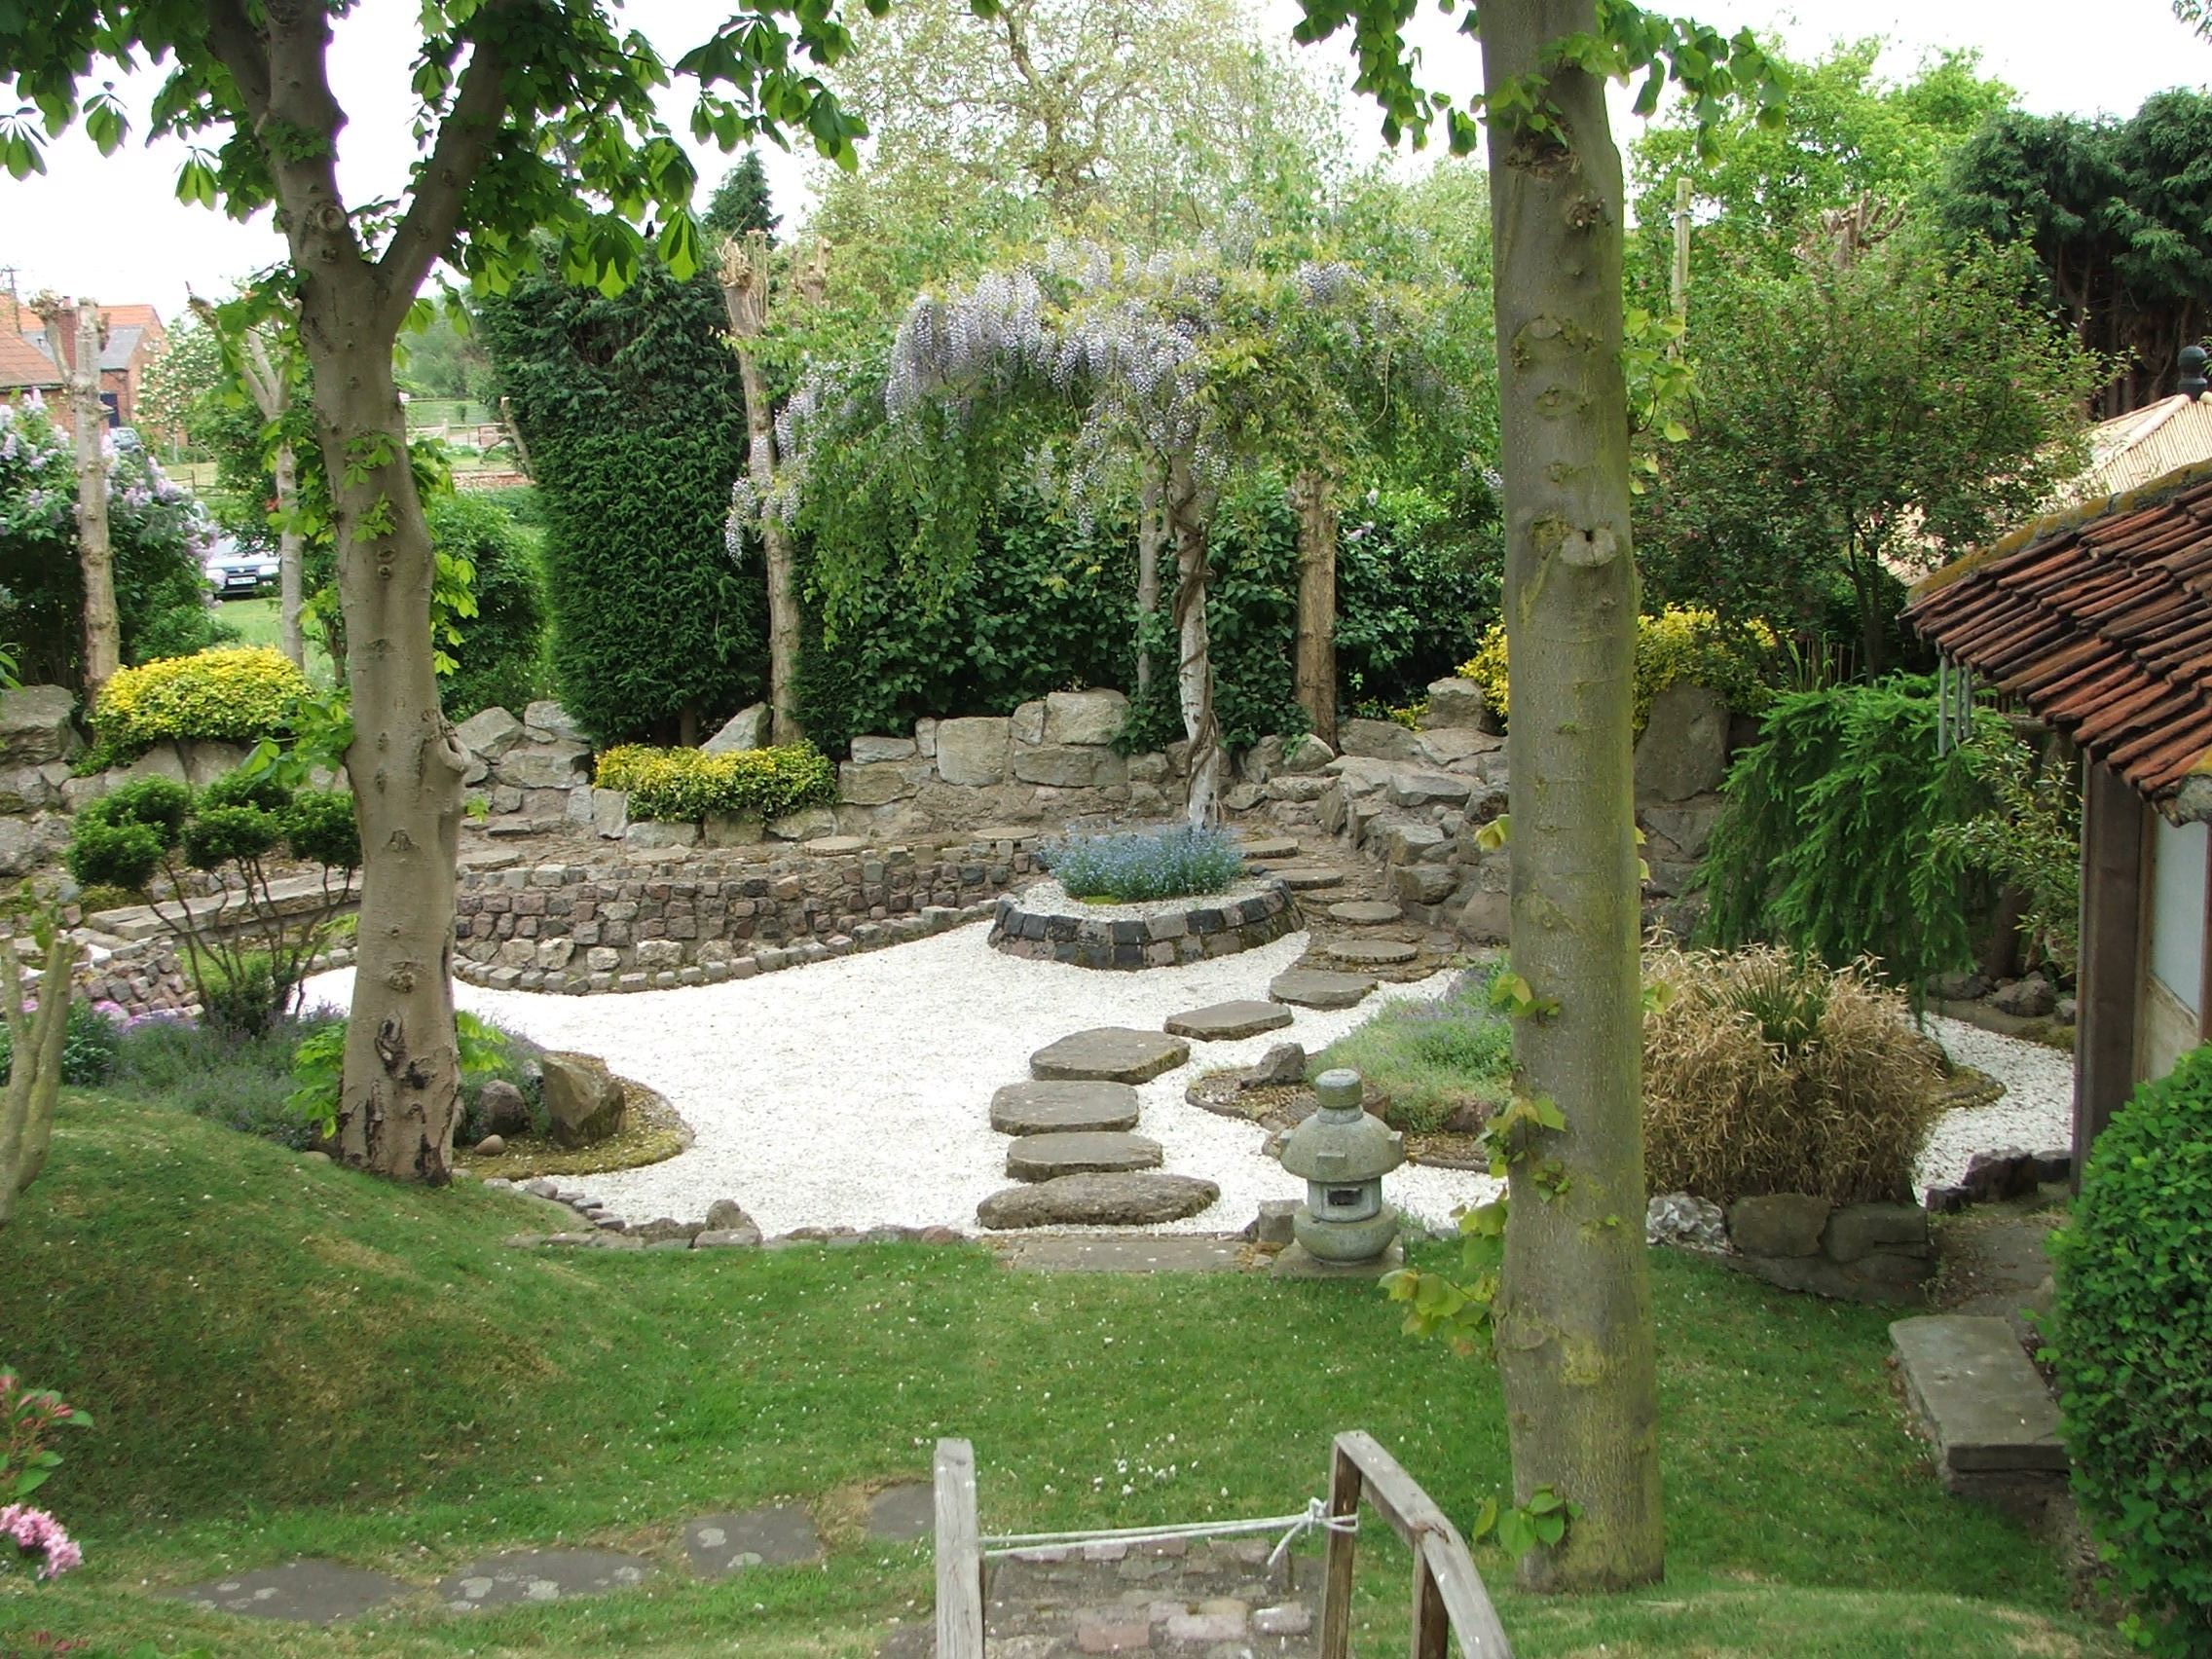 Welcome To My Japanese Gardens Blog-We Have 2 FREE Videos For YOU ...